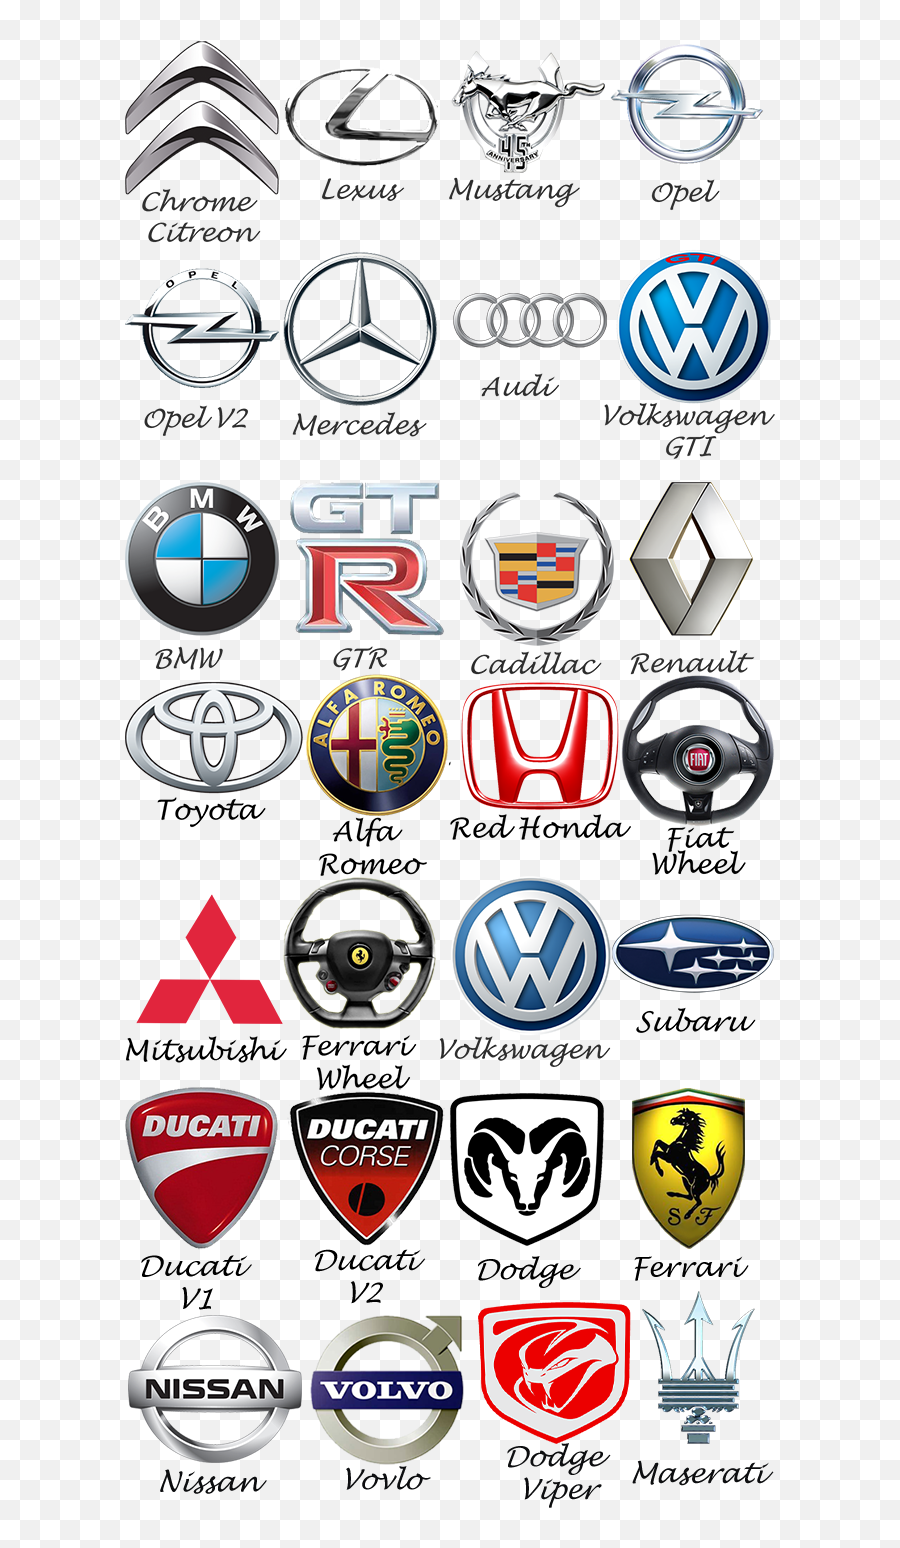 Cars And Their Names List Logo Png - Car Logos And Names List,Car Logo List